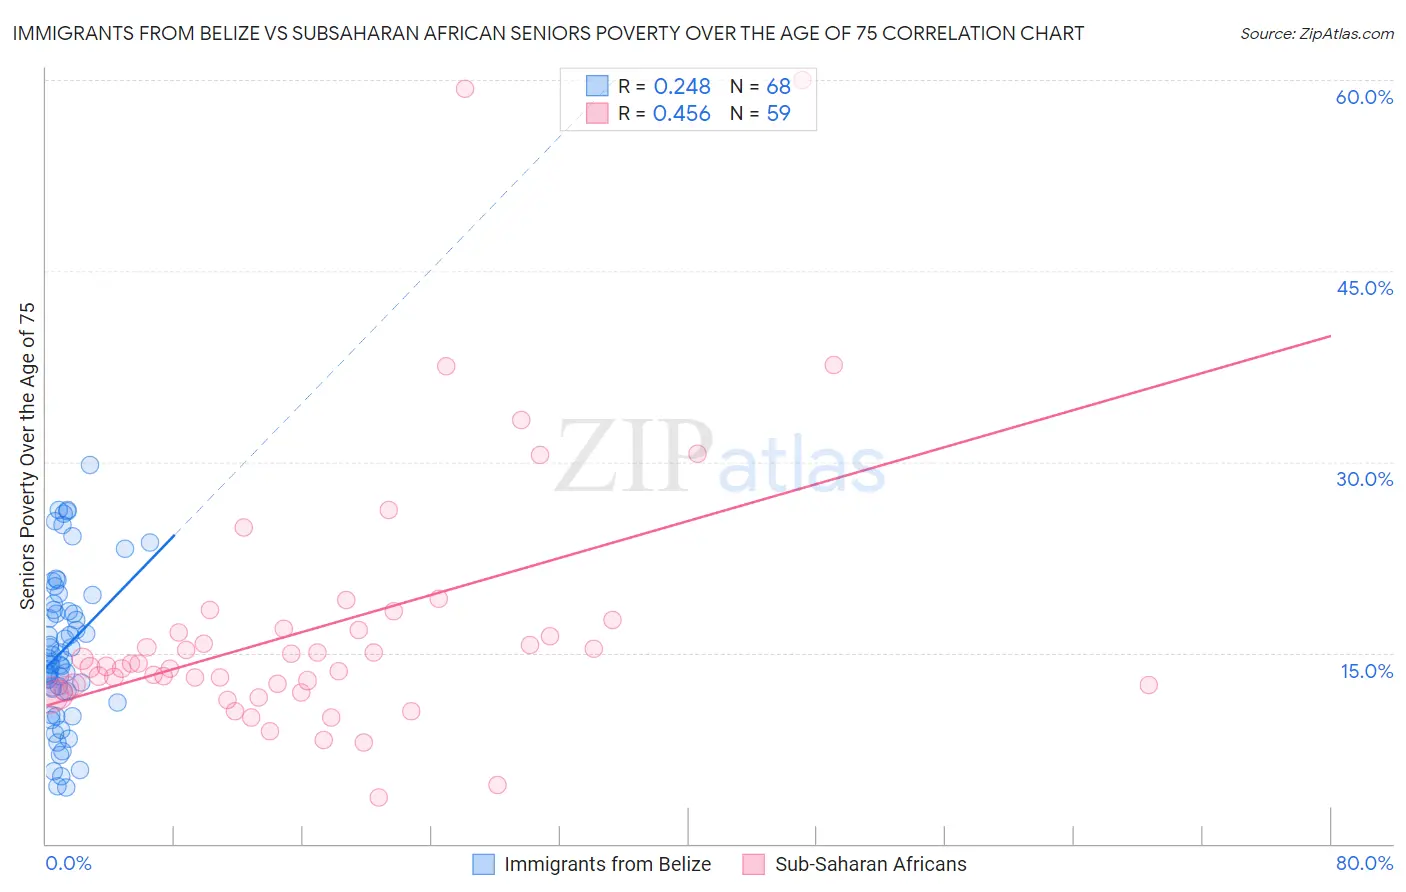 Immigrants from Belize vs Subsaharan African Seniors Poverty Over the Age of 75